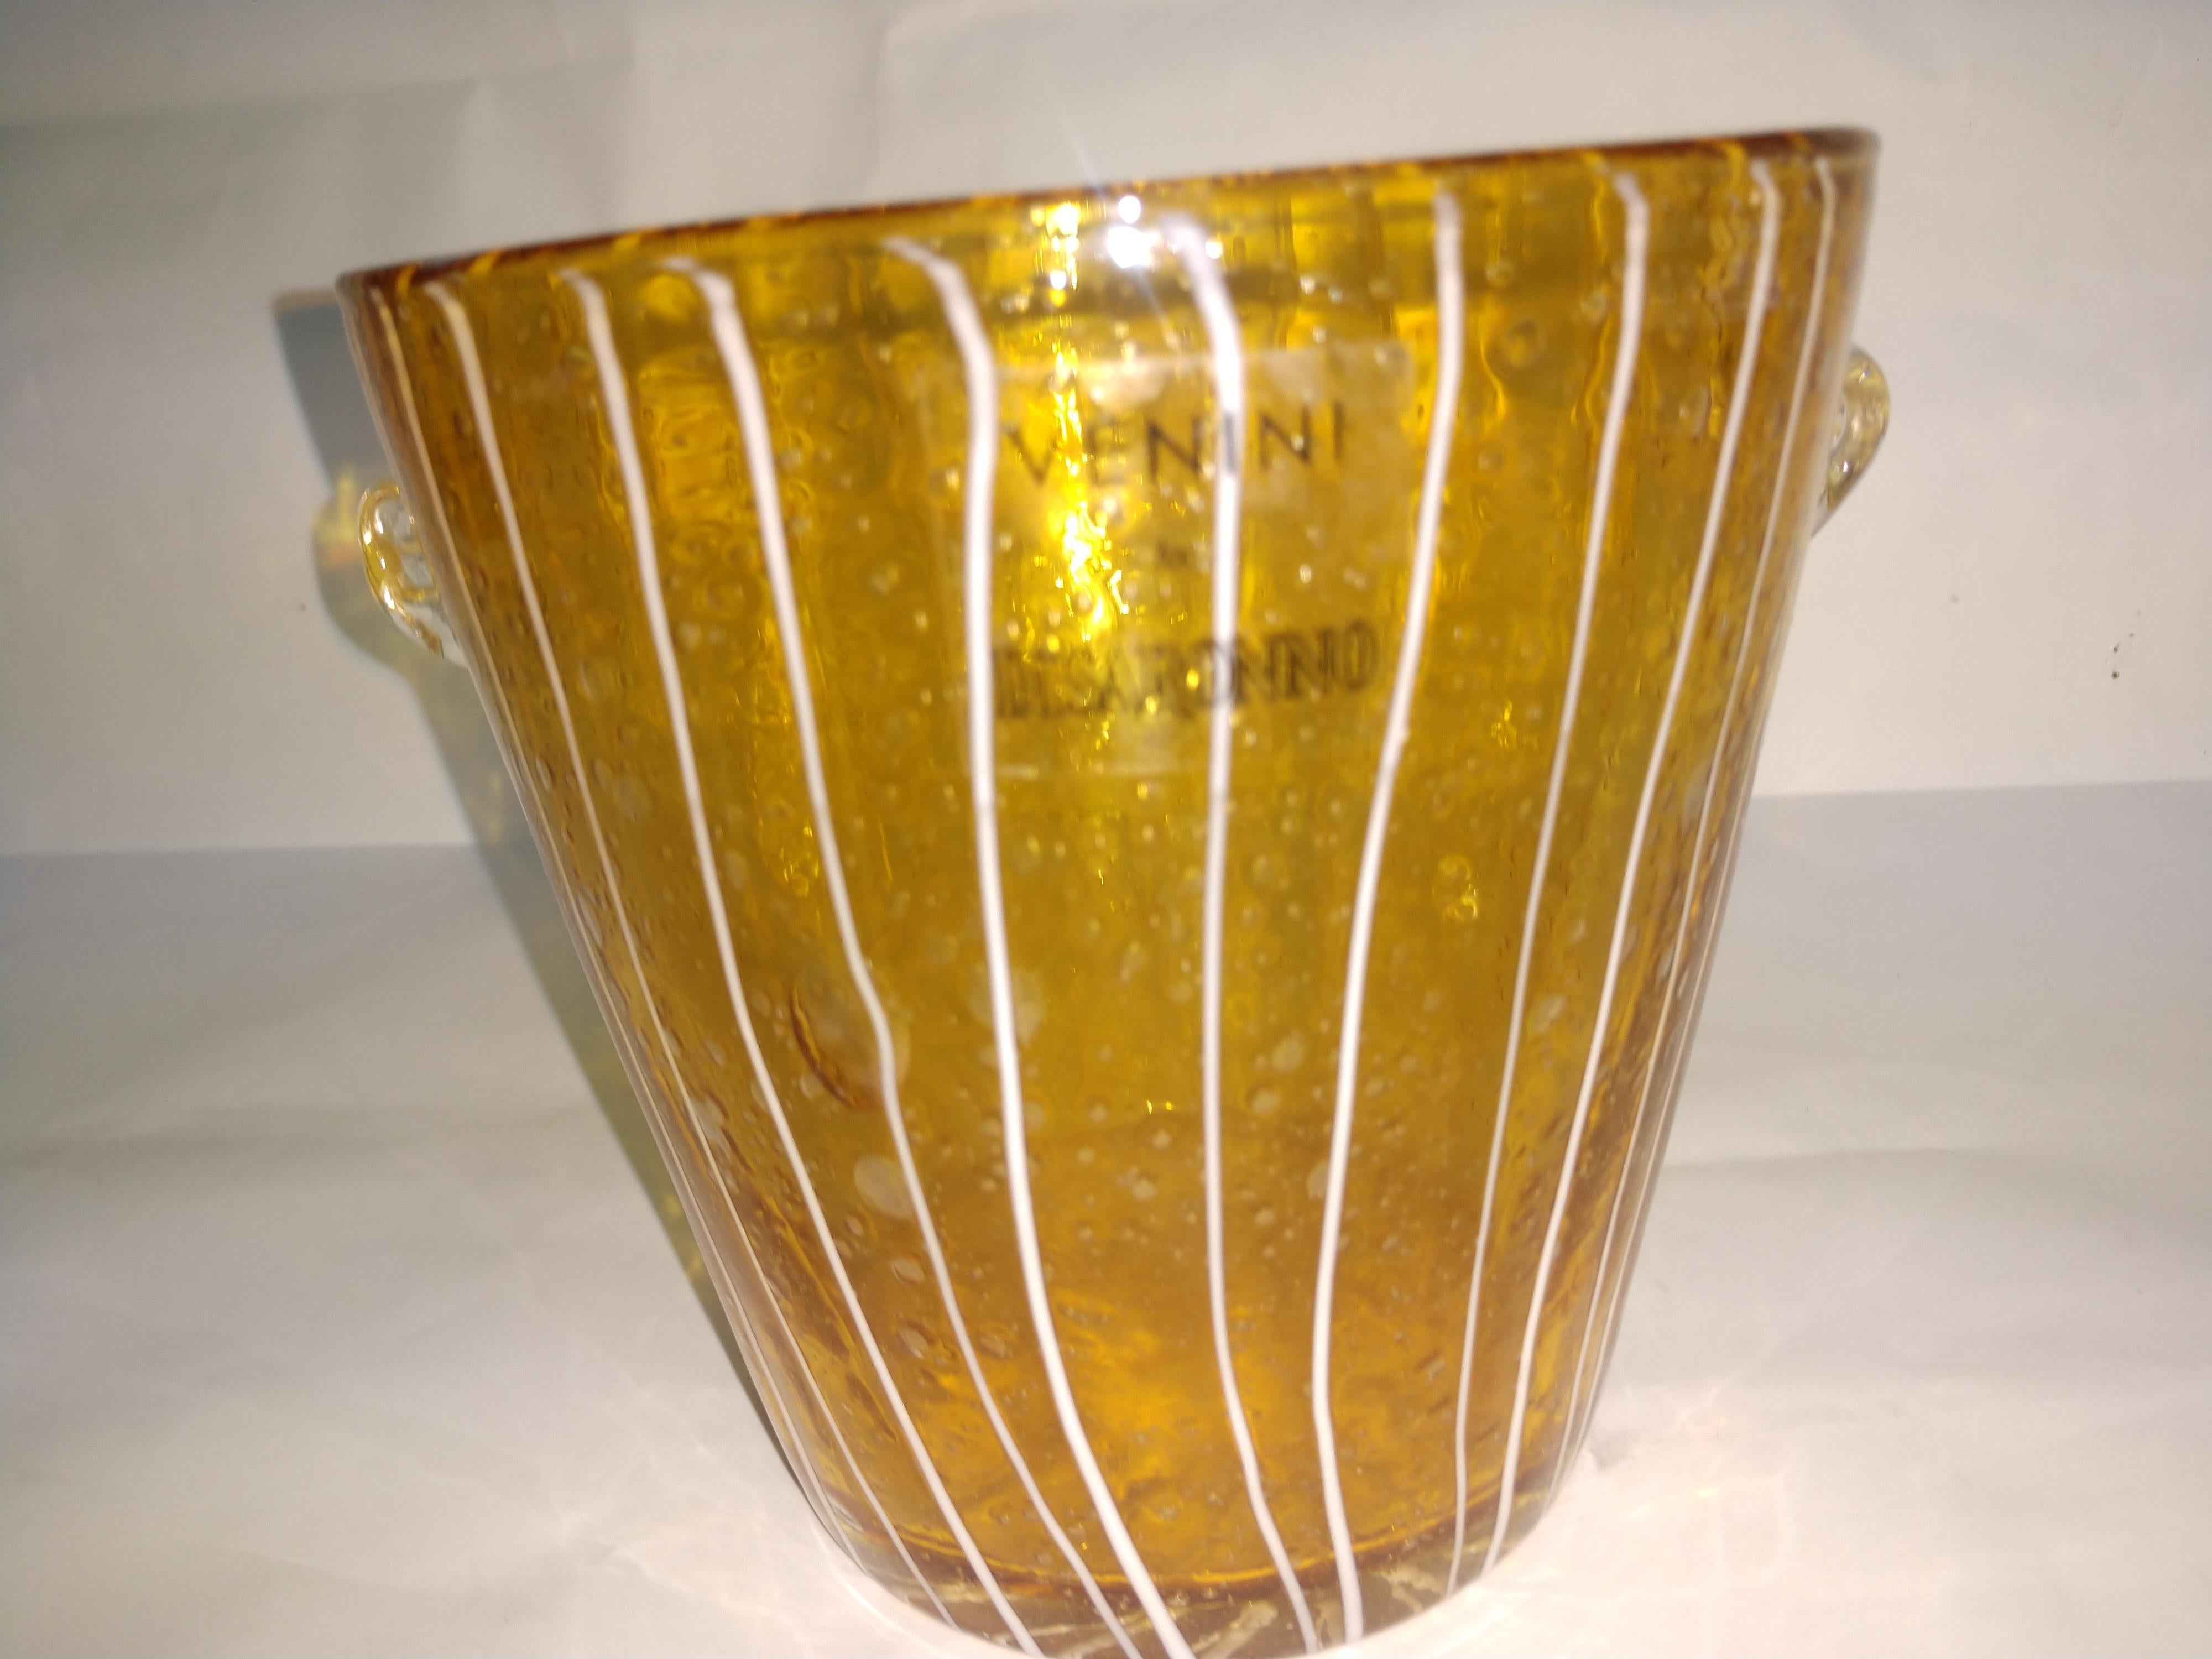 Mid-Century Modern Art Glass Vase by Venini In Excellent Condition For Sale In Port Jervis, NY